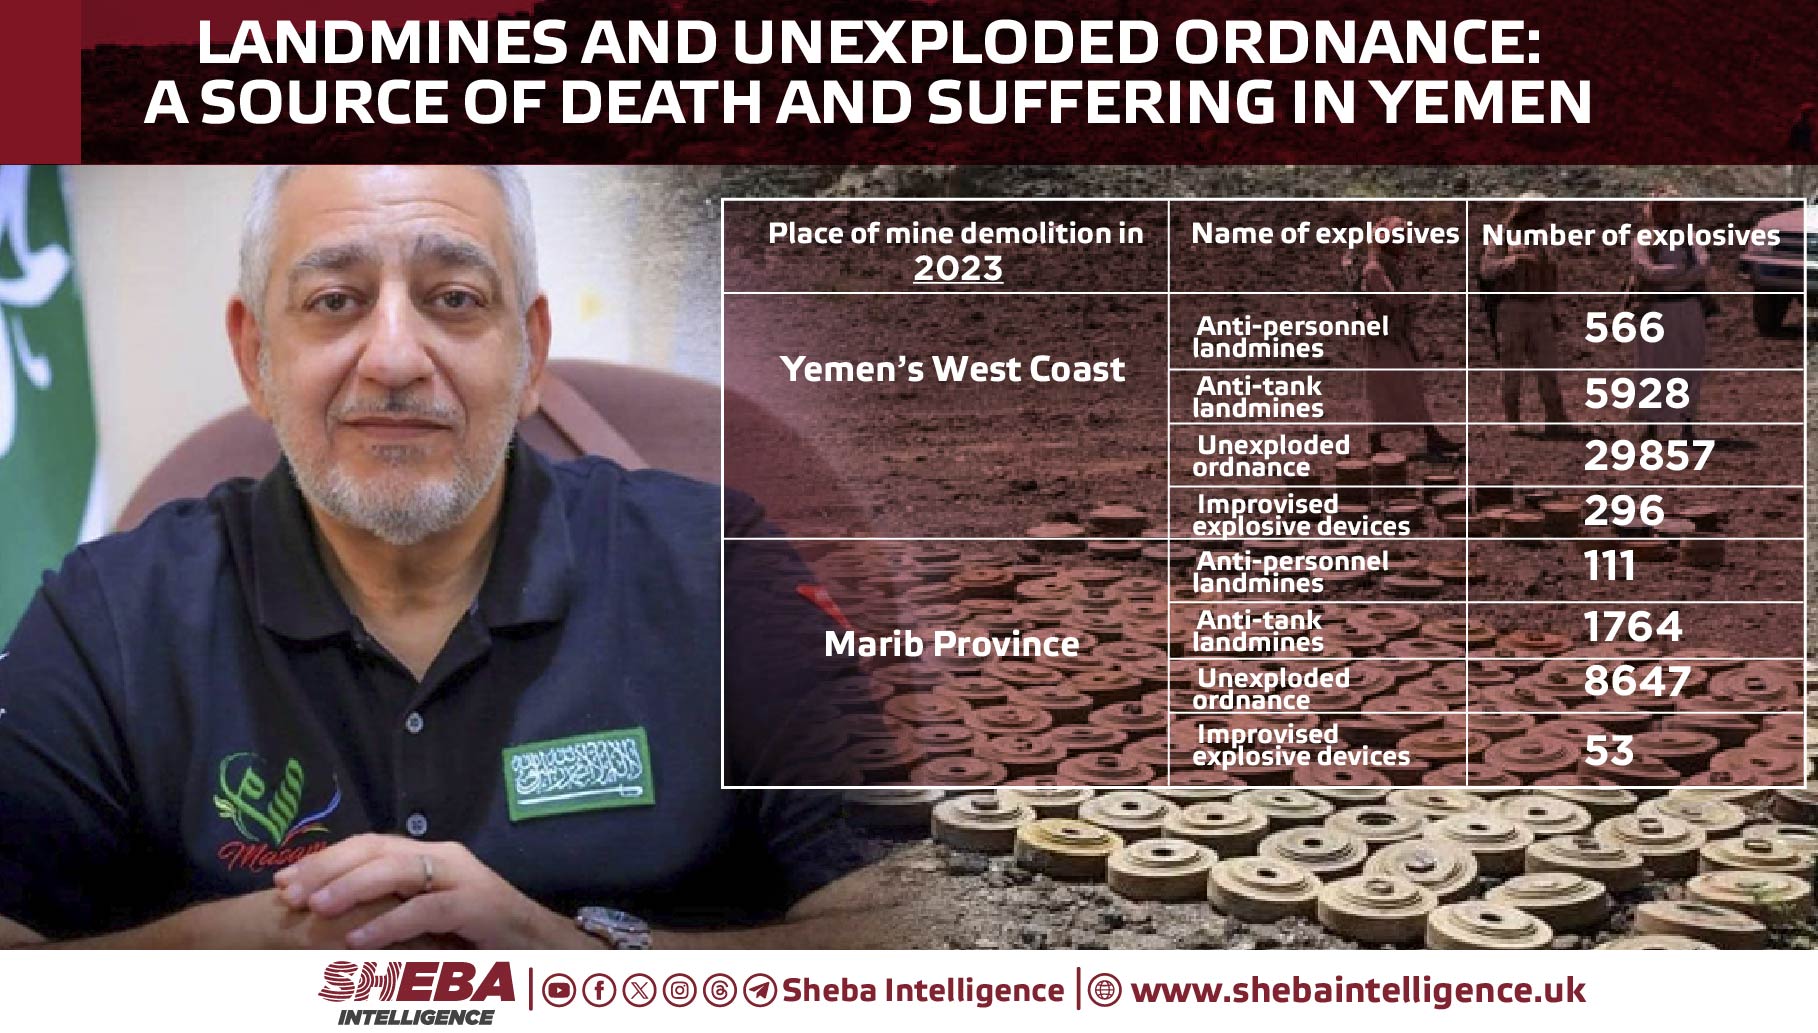 Landmines and Unexploded Ordnance: A Source of Death and Suffering in Yemen